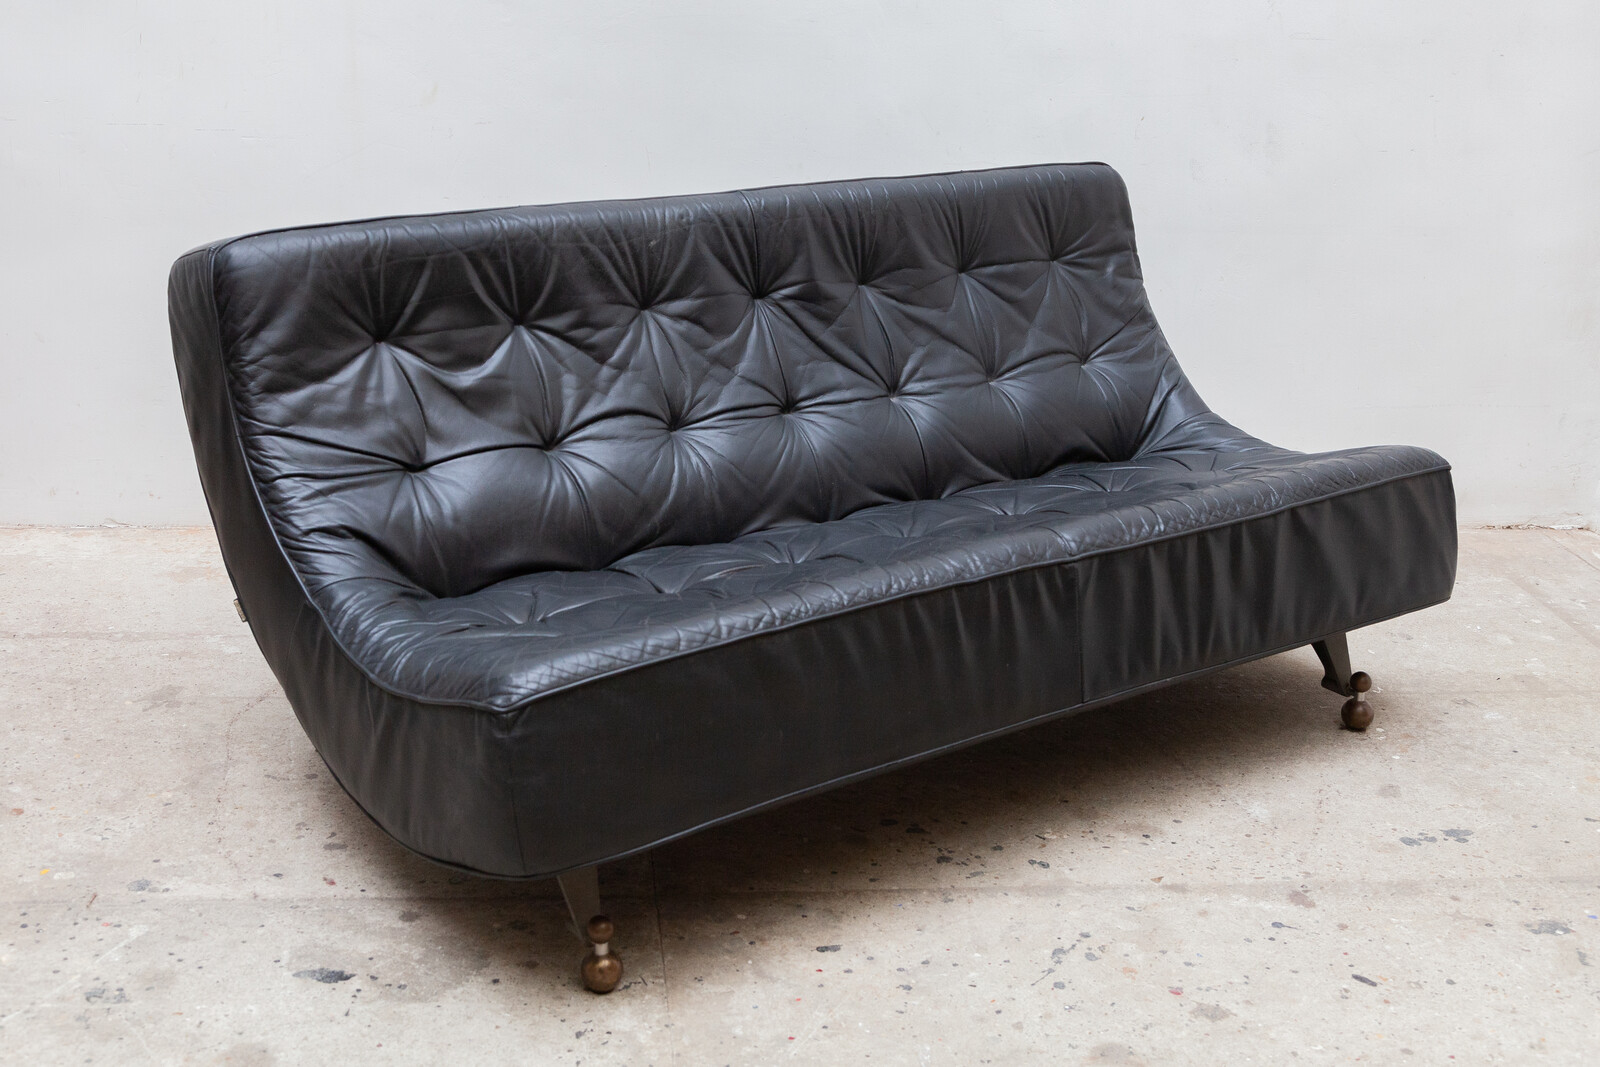 Montis Black Leather Tufted Sofa by Gerard van den Berg 1980s, Netherlands  - Akanthos Eclectic Interiors - Recent Added Items - European ANTIQUES &  DECORATIVE